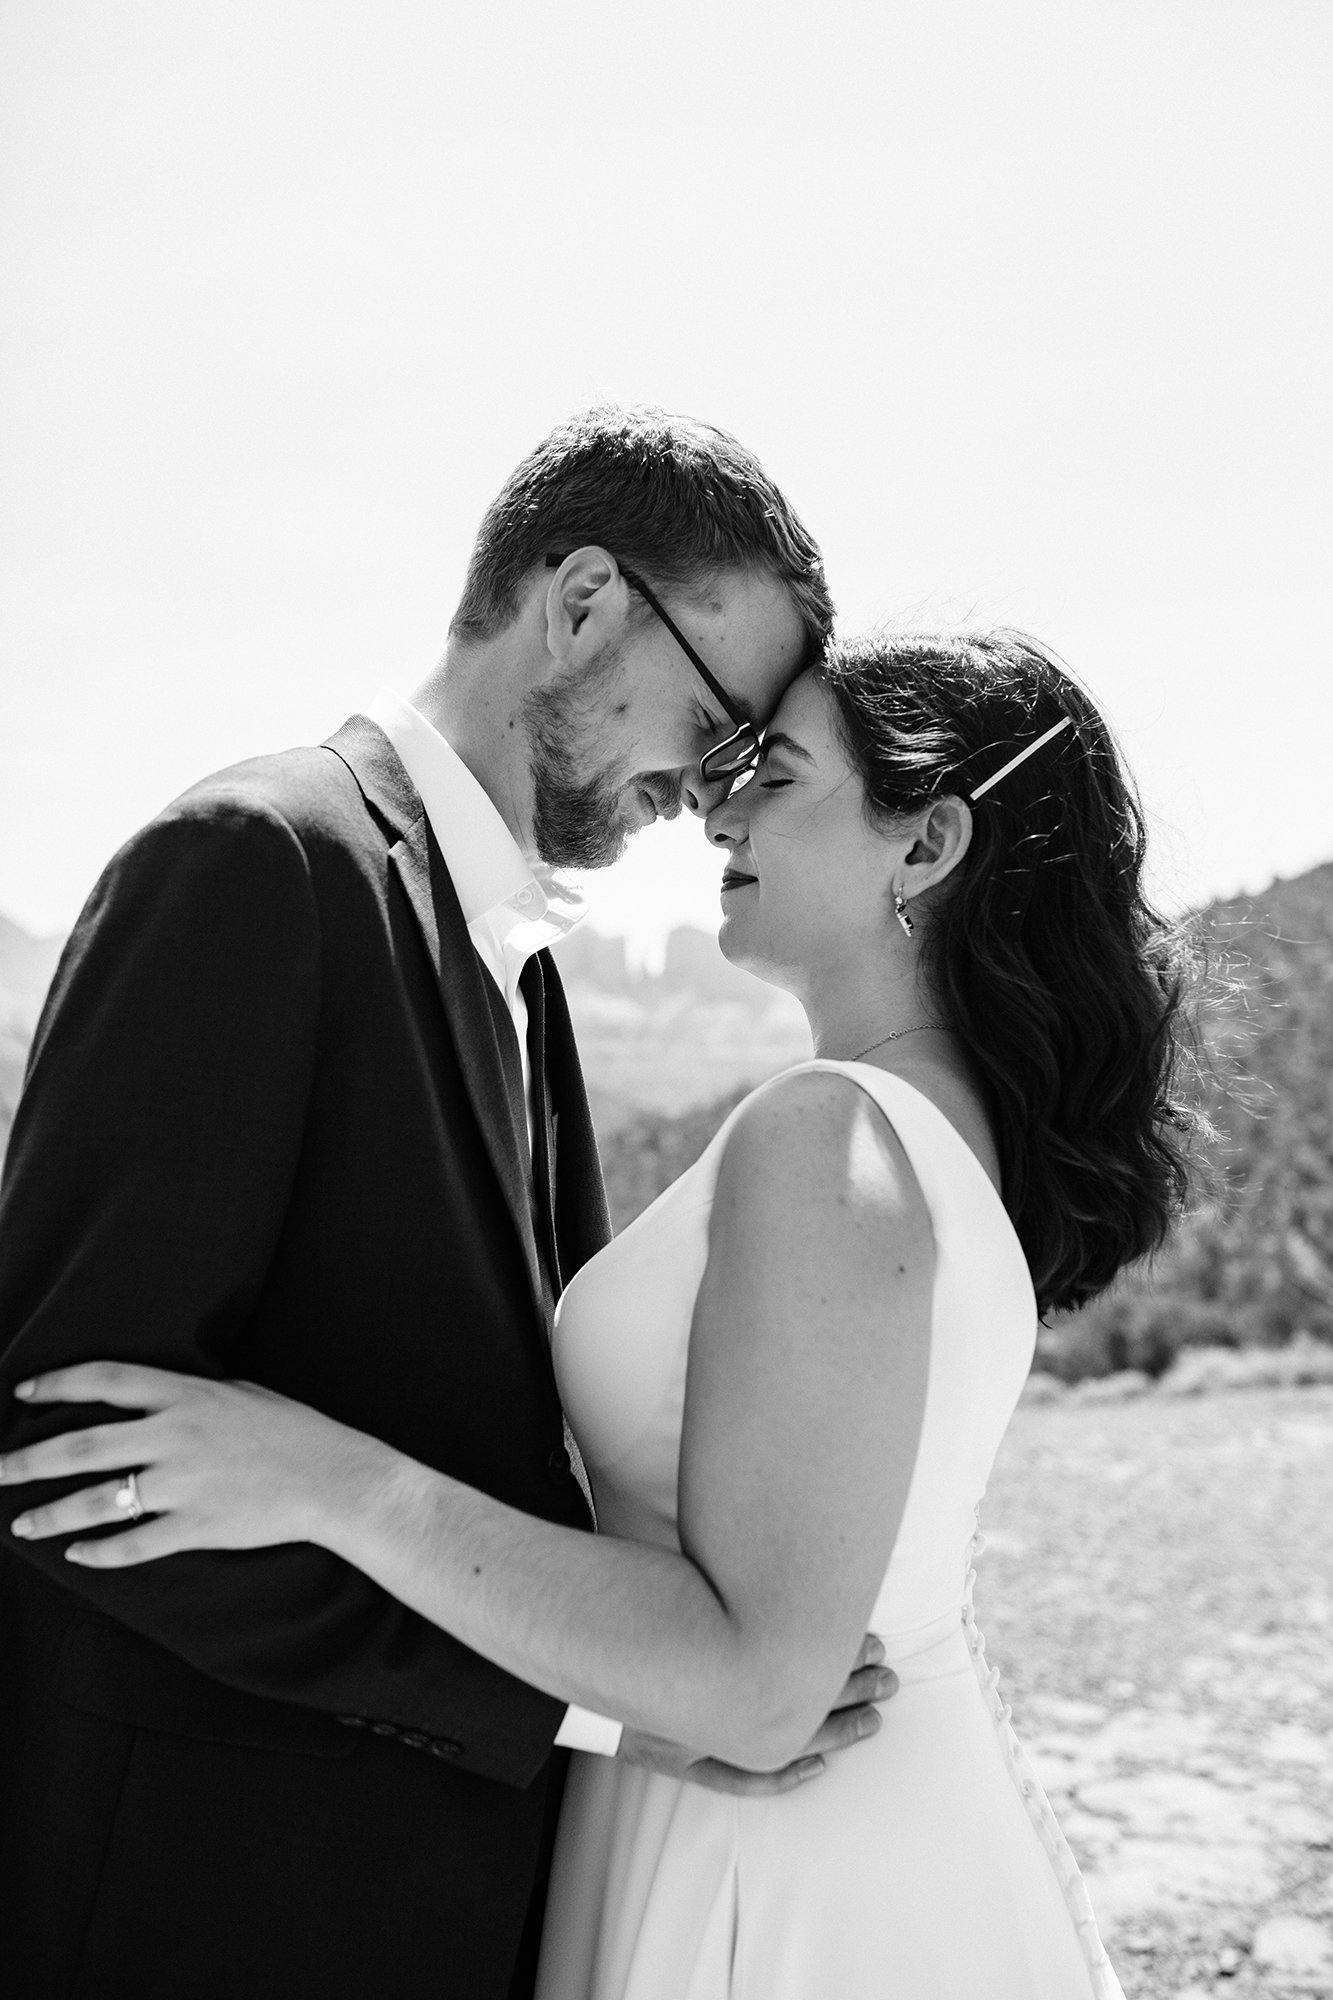 Nose to nose, our wedding couple, Steph and Matt, take in the joy of getting married in Sedona Arizona